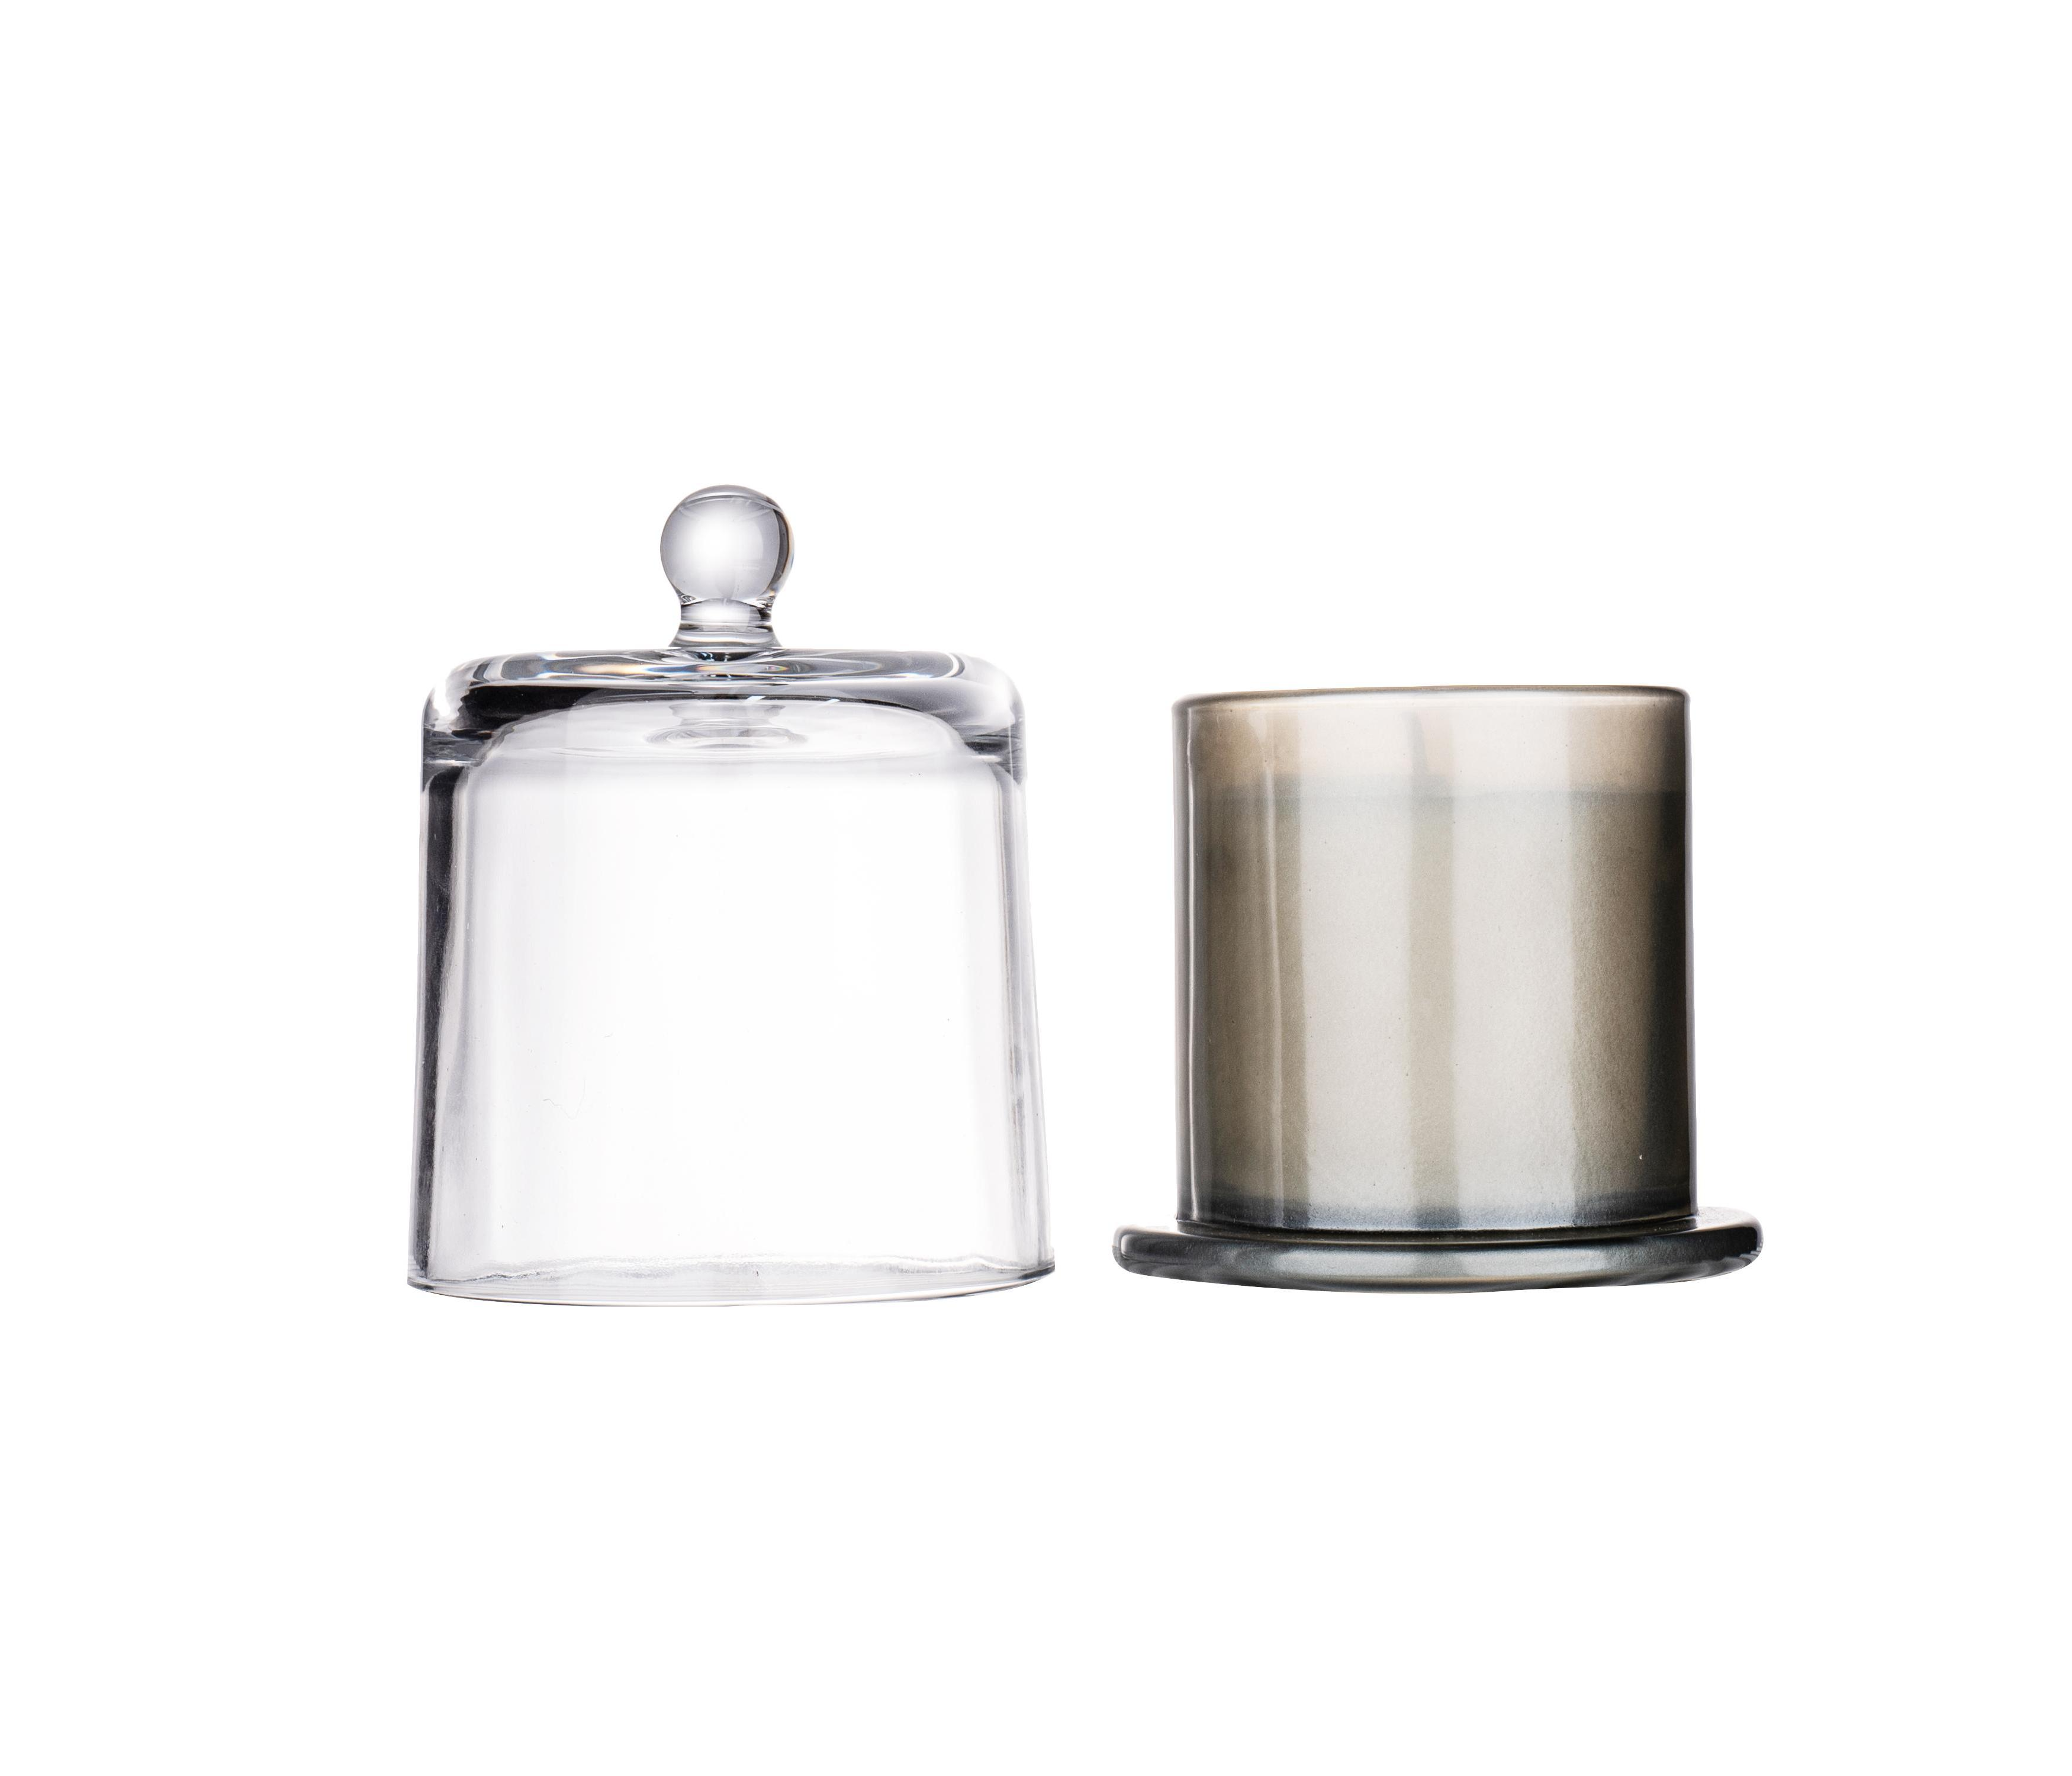 Round Classics Bell Shaped Glass Candle Cup With Dome Lid For Home Decoration Featured Image